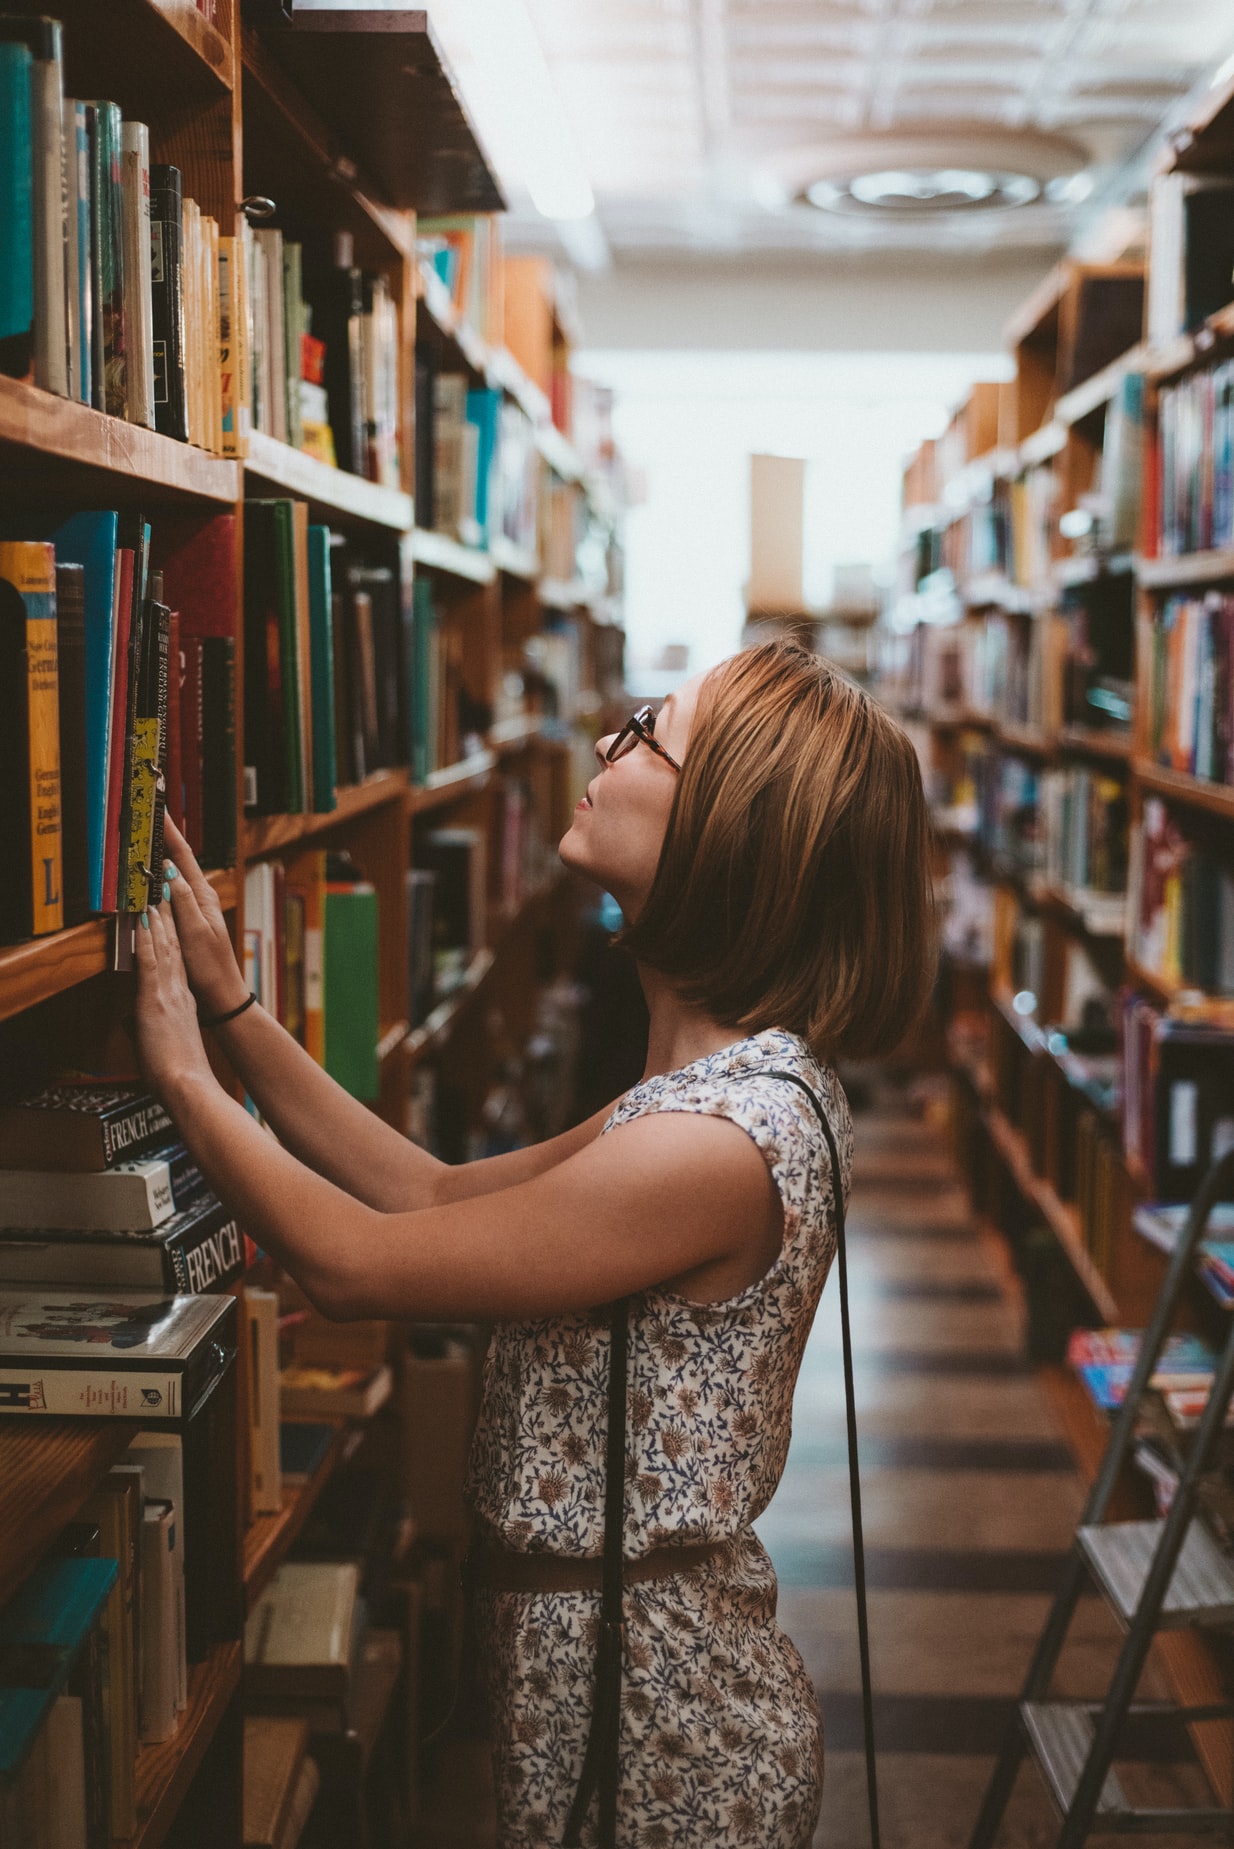 Woman Looking Through Library Shelves